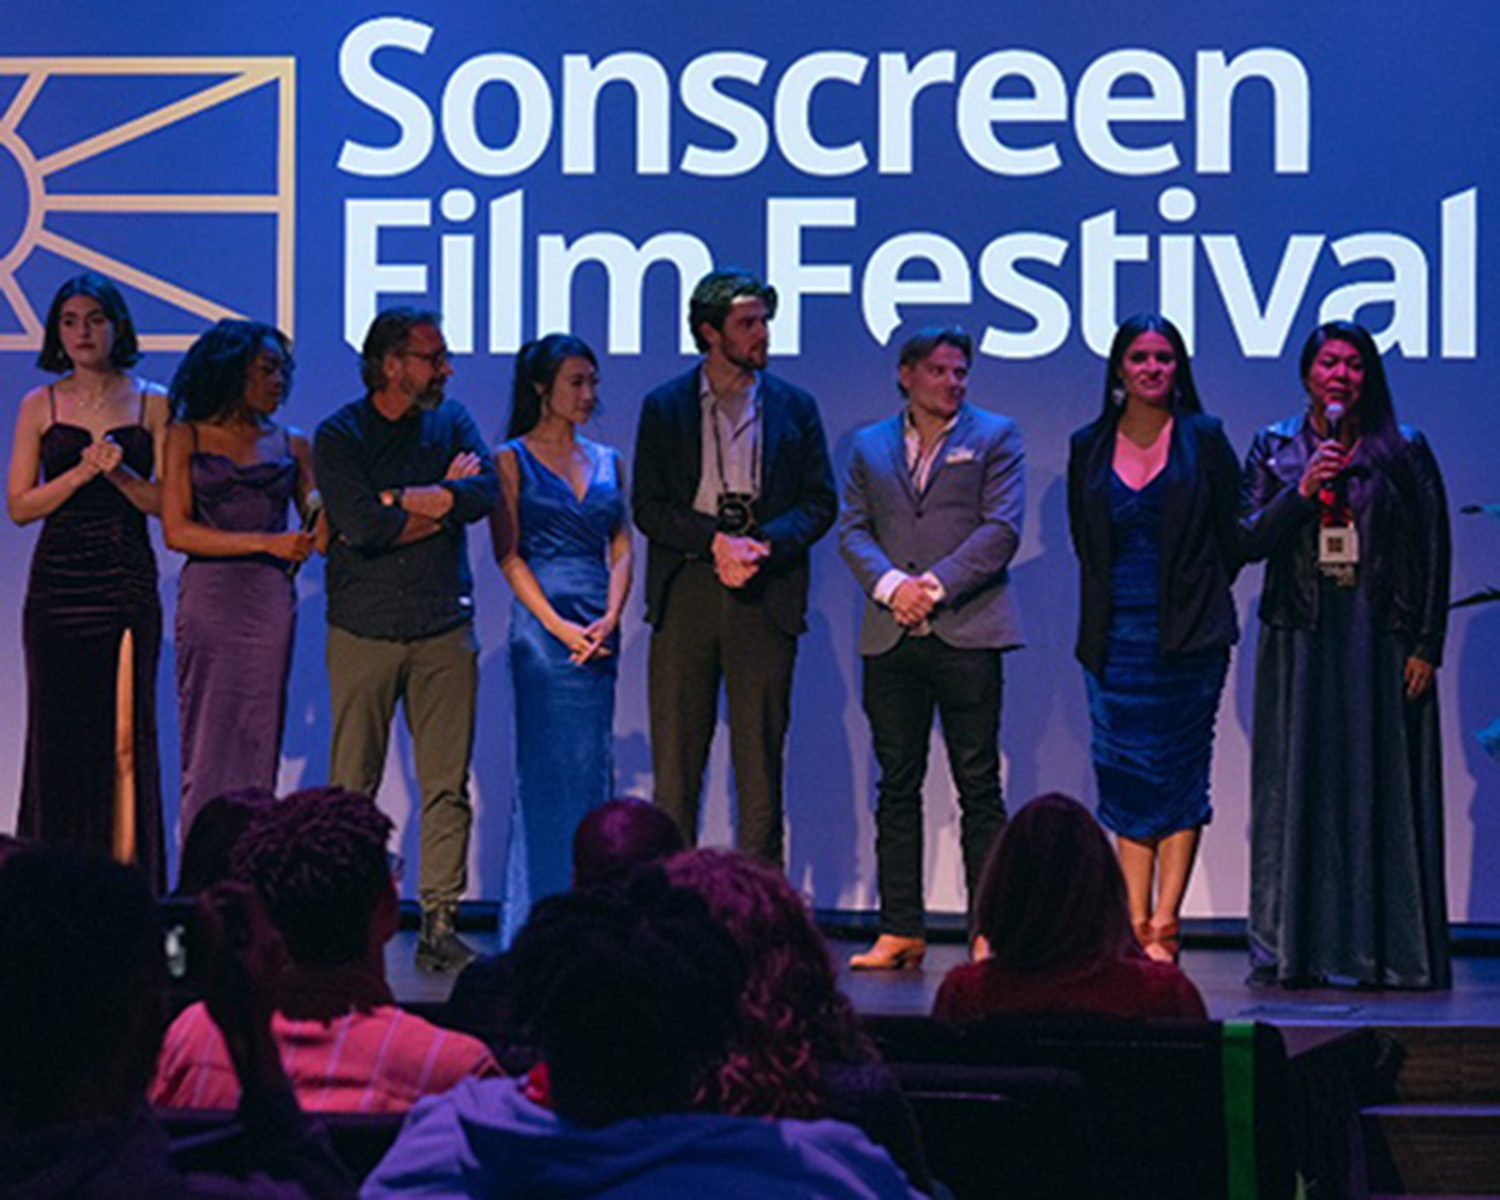 Group of people standing on the stage at a film festival.